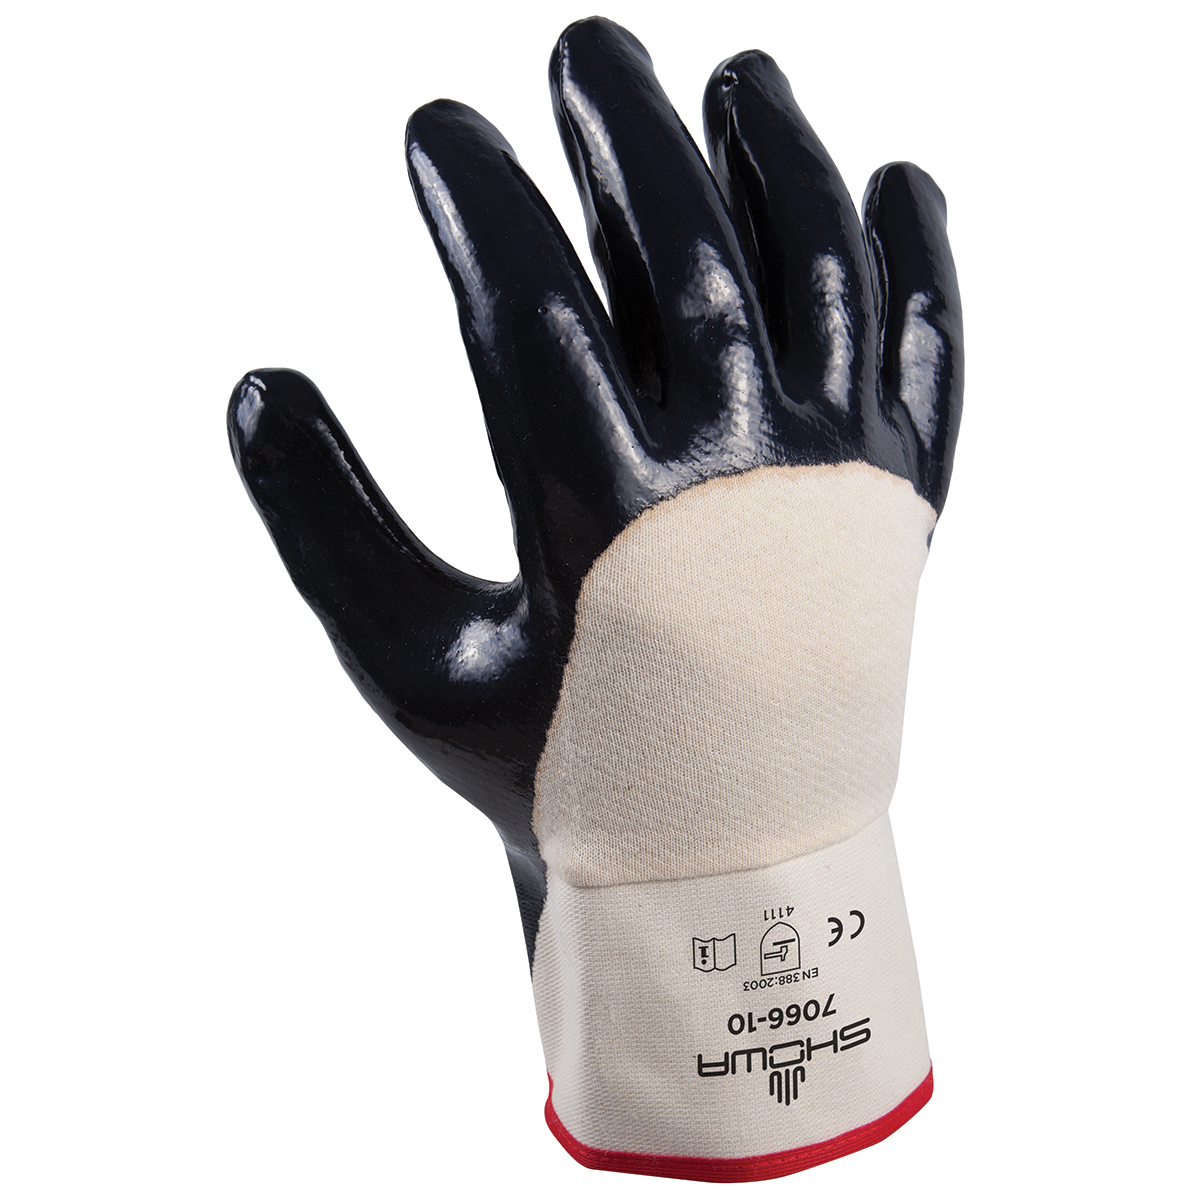 General purpose nitrile-coated, white w/navy dip, palm-coated rubberized safety cuff, small